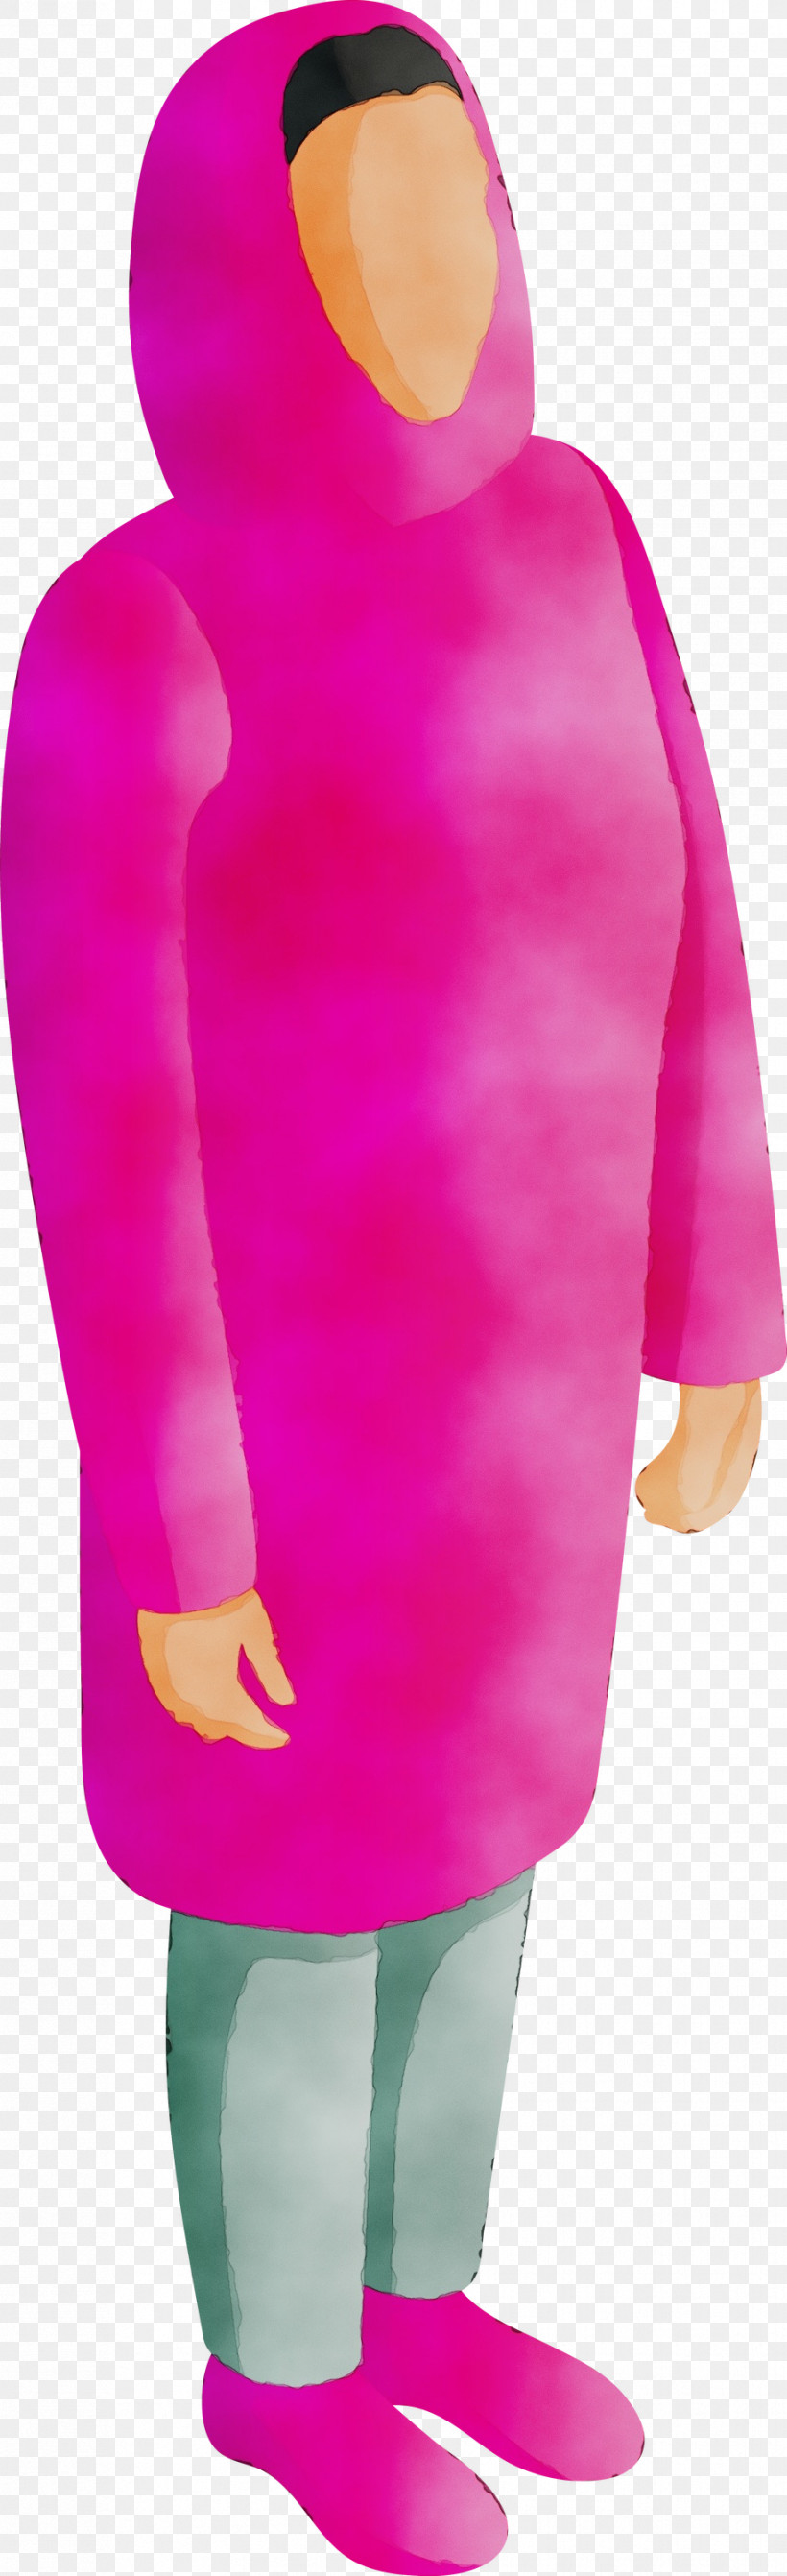 Pink Clothing Magenta Sleeve Costume, PNG, 916x2999px, Arabic Family, Arab People, Arabs, Clothing, Costume Download Free